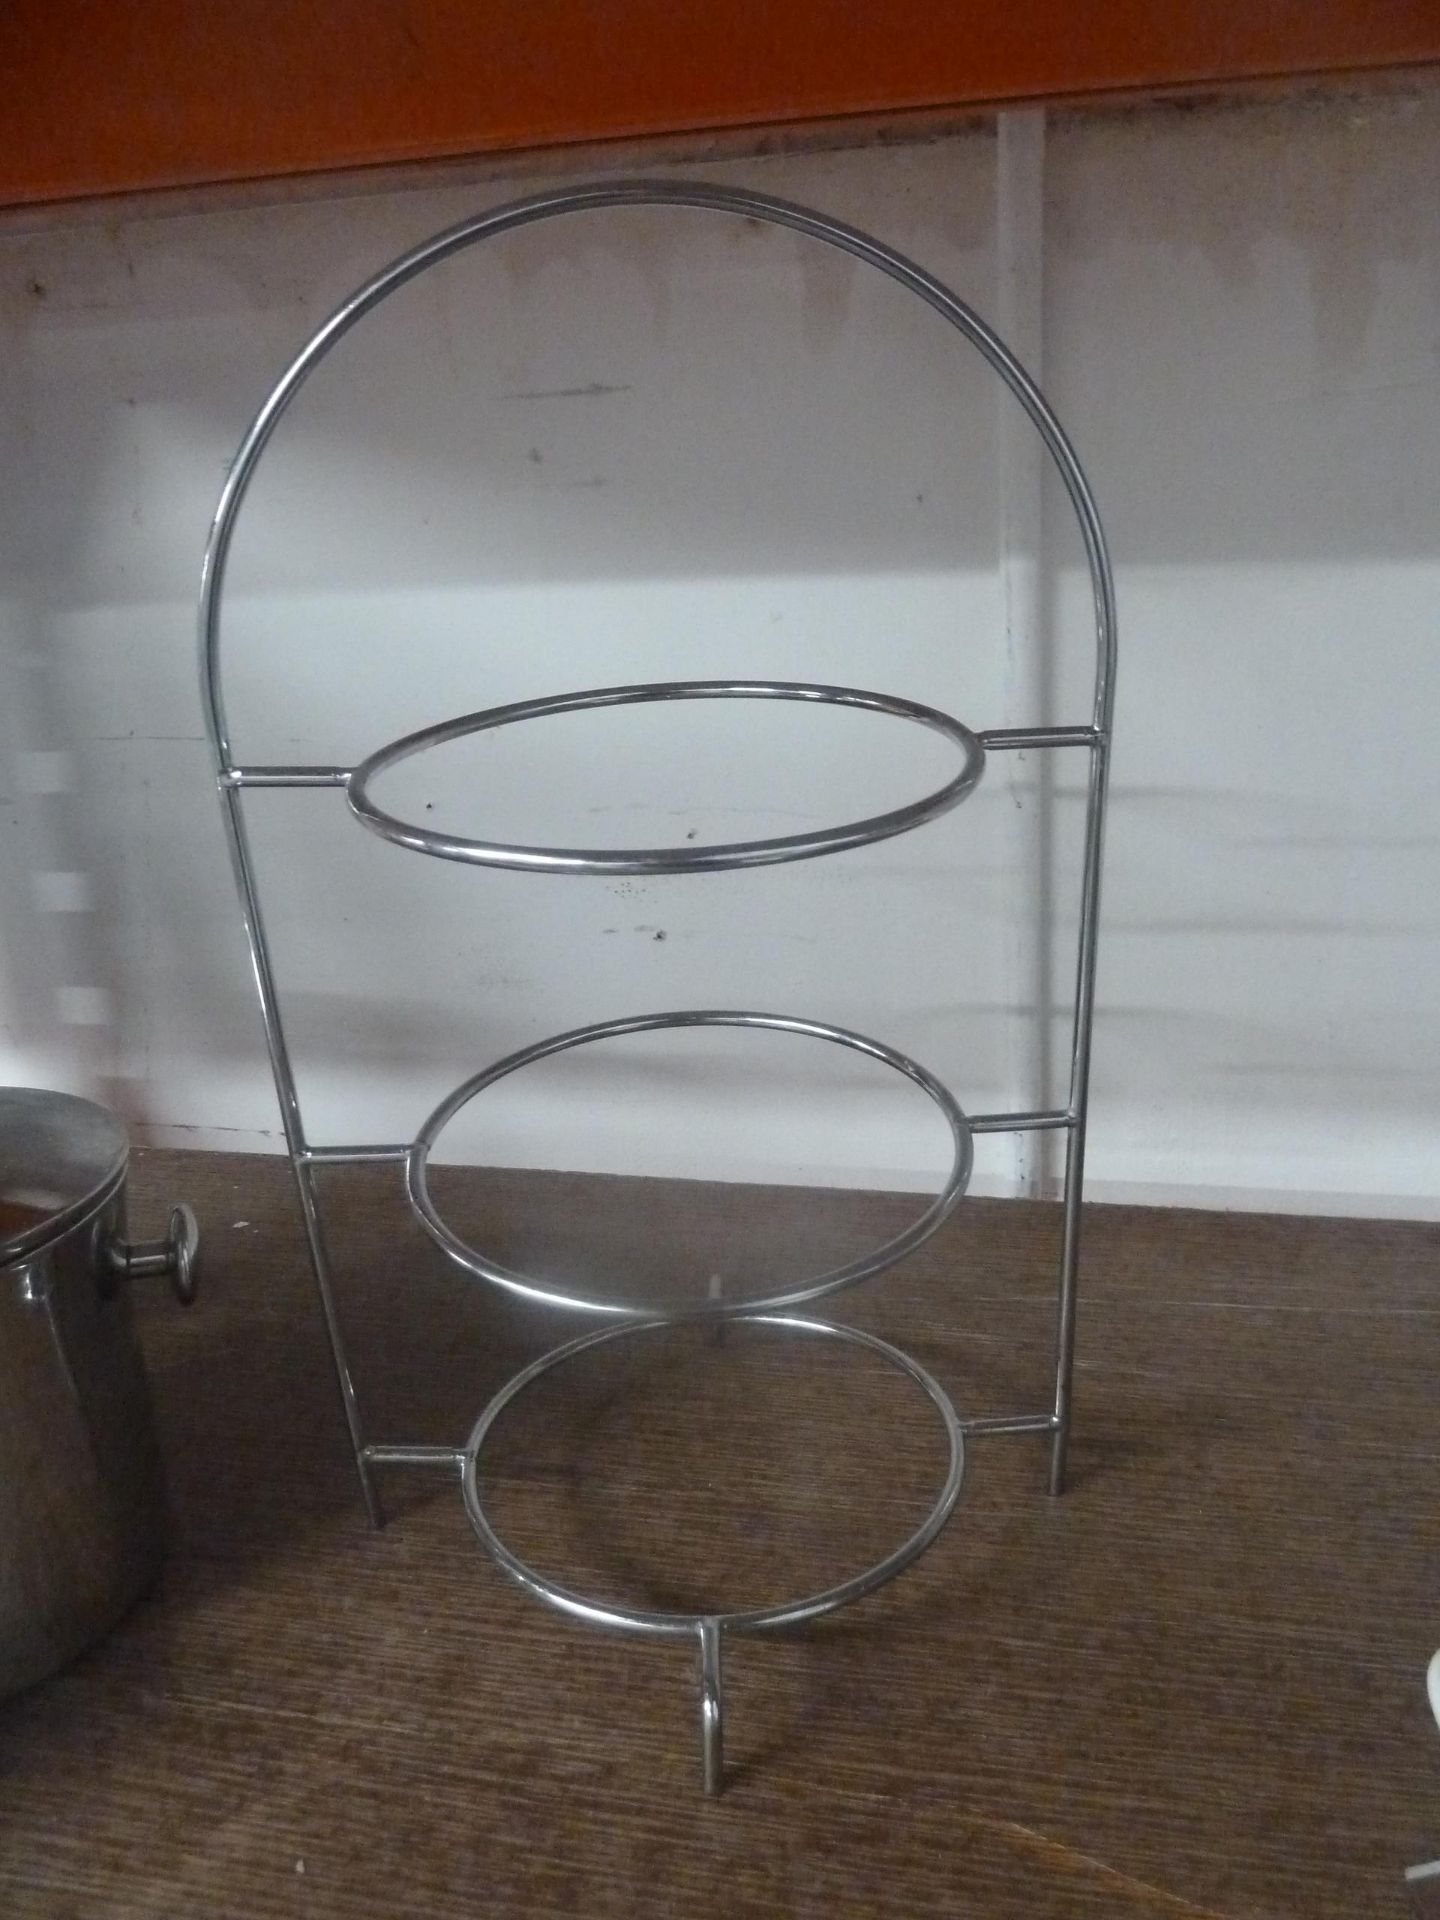 * 5 x S/S afternoon tea plate stands